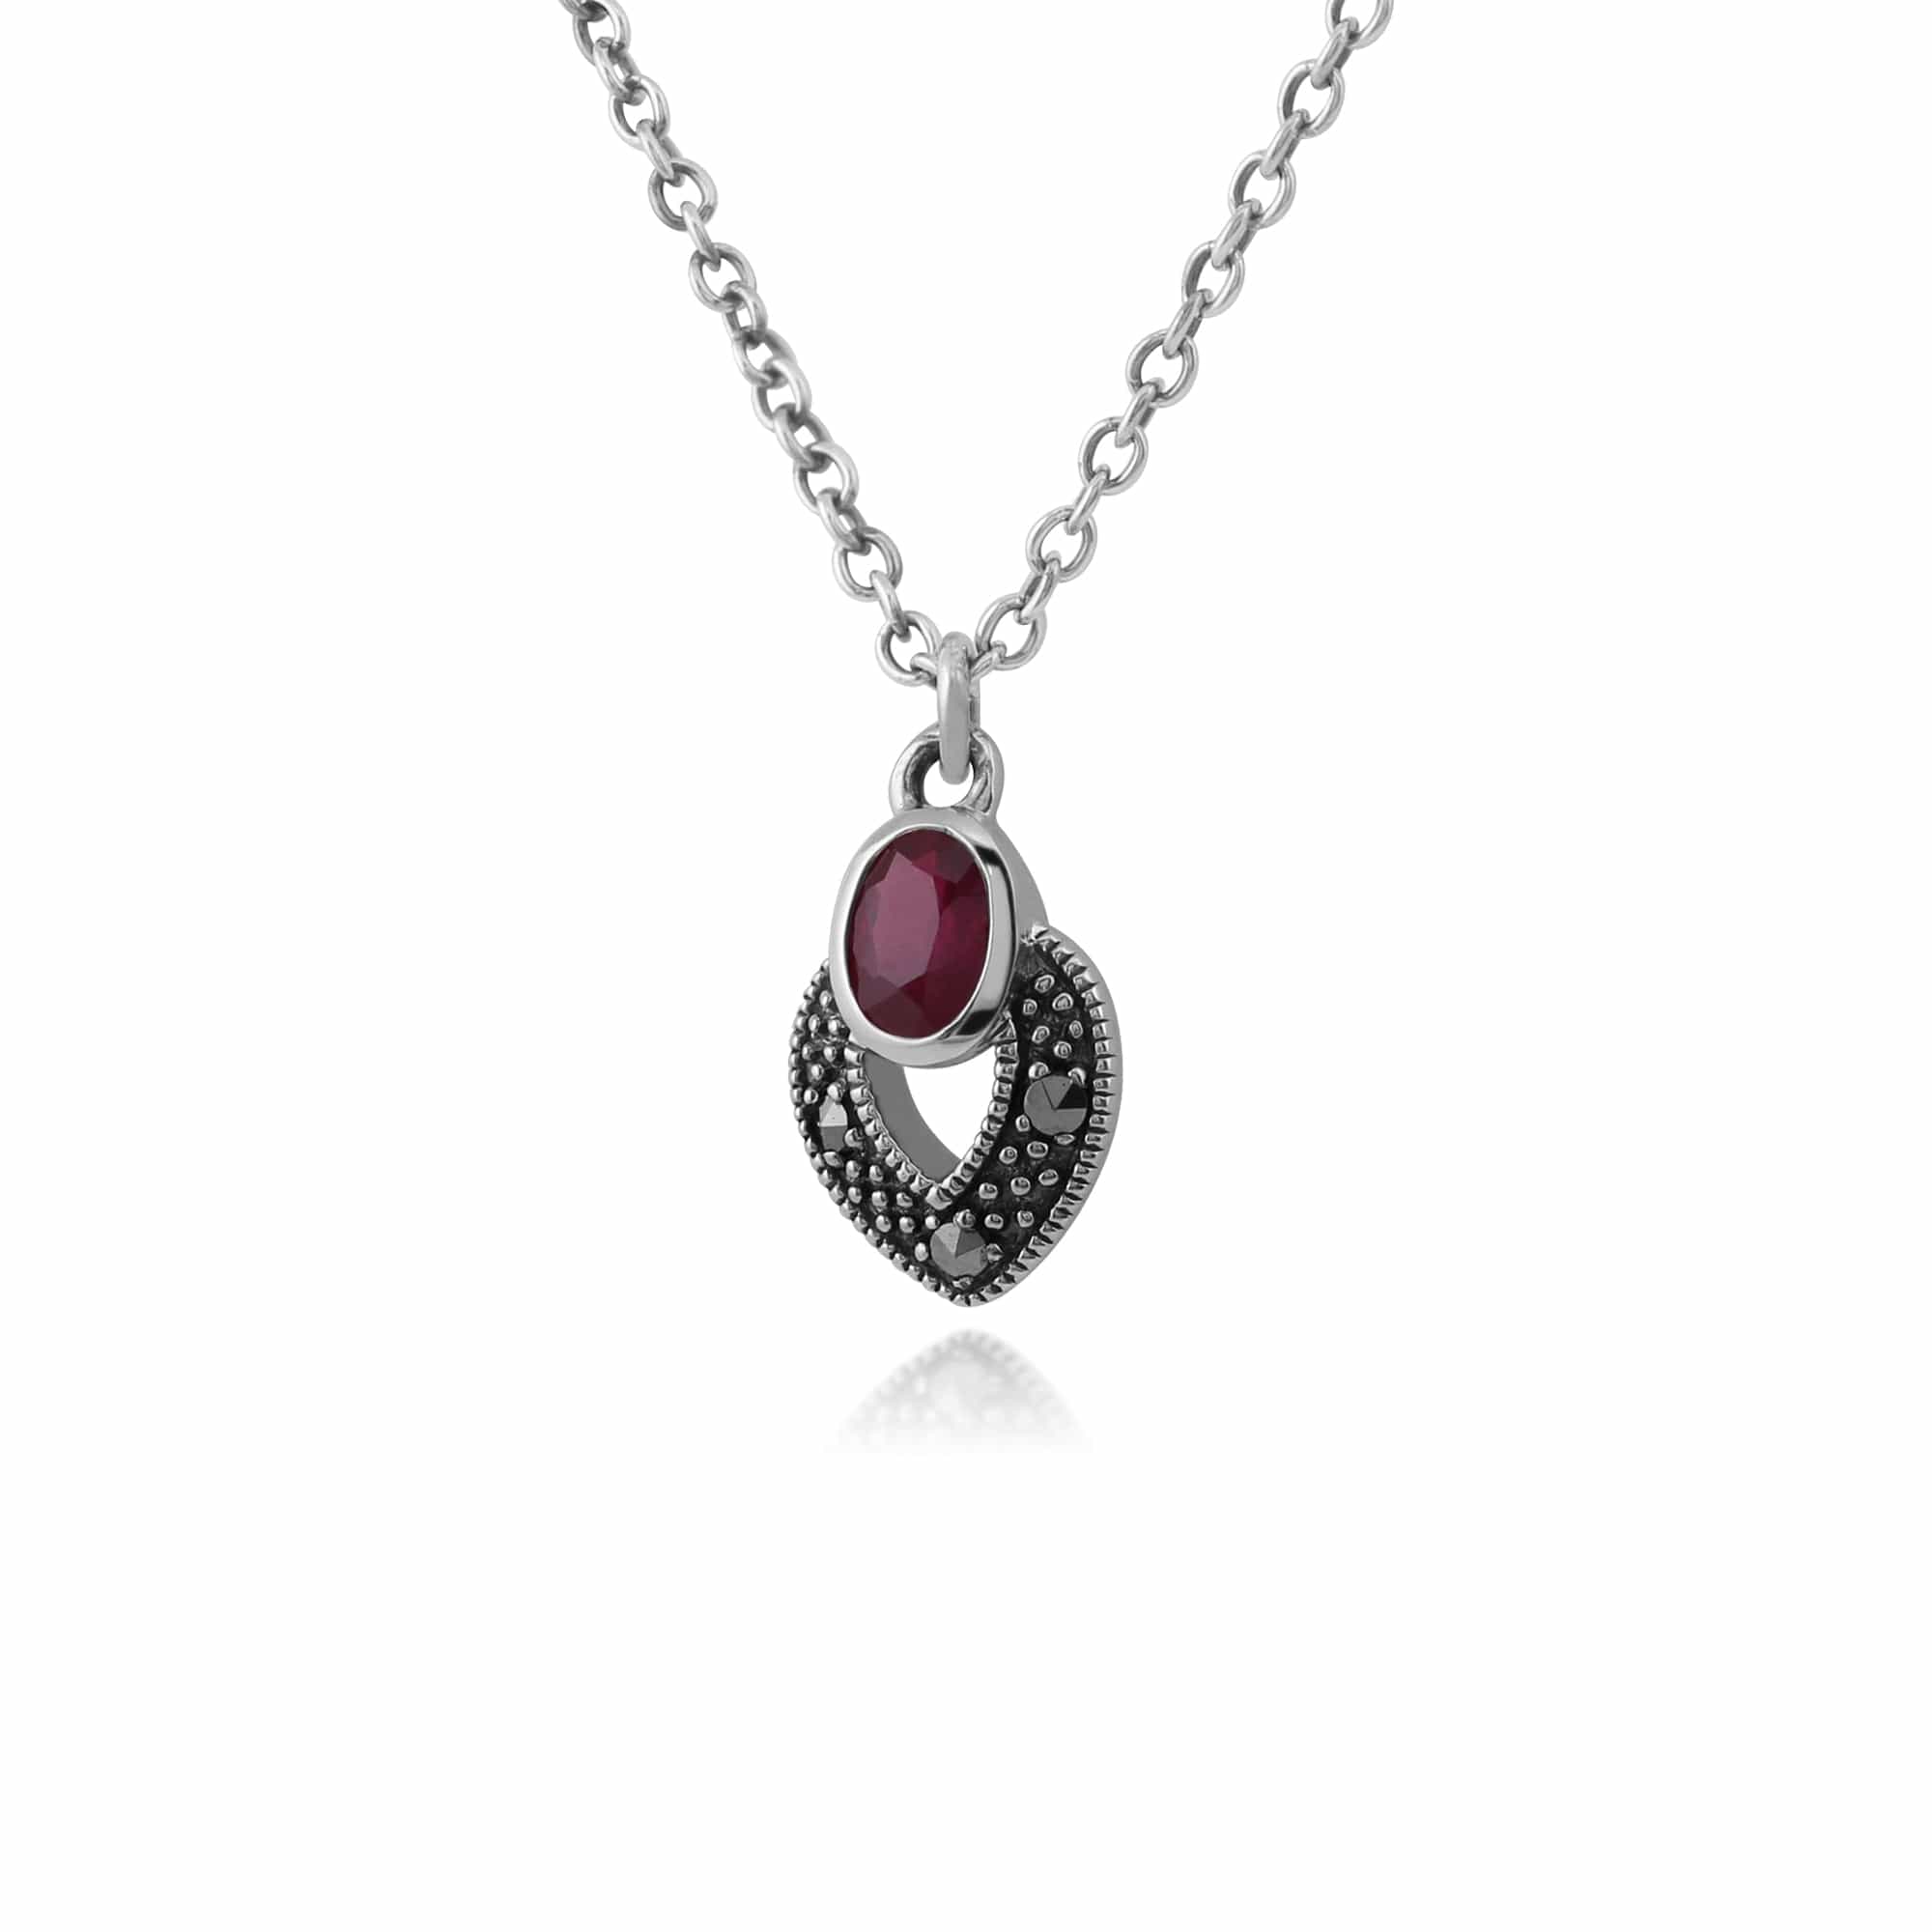 Art Deco Style Oval Ruby & Marcasite Necklace in 925 Sterling Silver - Gemondo